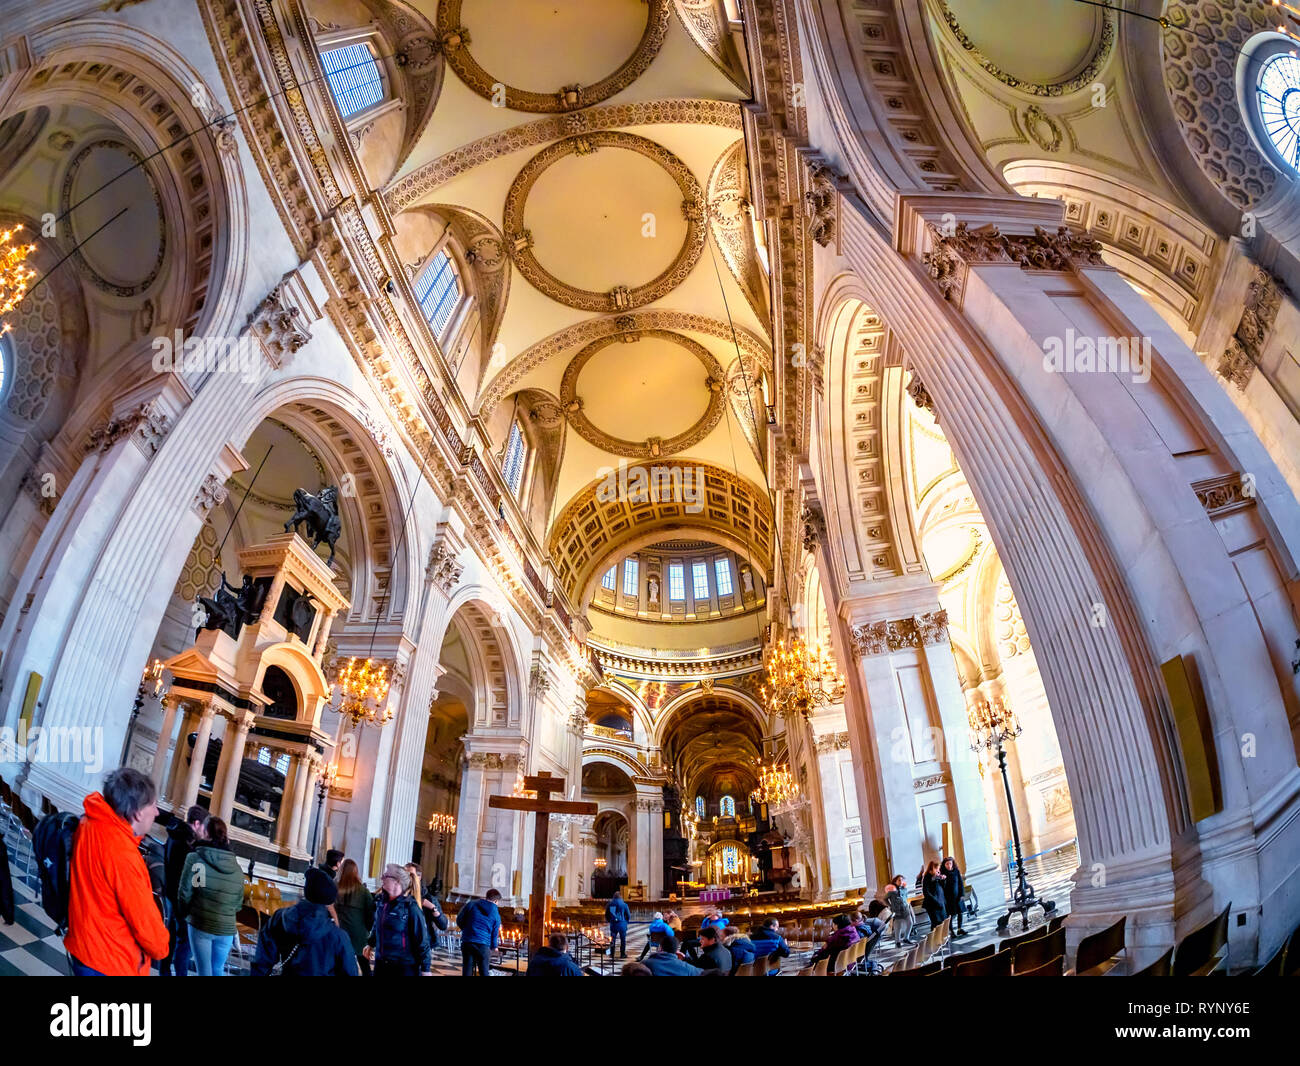 London, England, UK - March 10, 2019: Interior architecture of the famous Saint Paul Cathedral before the religious ceremony in London Stock Photo